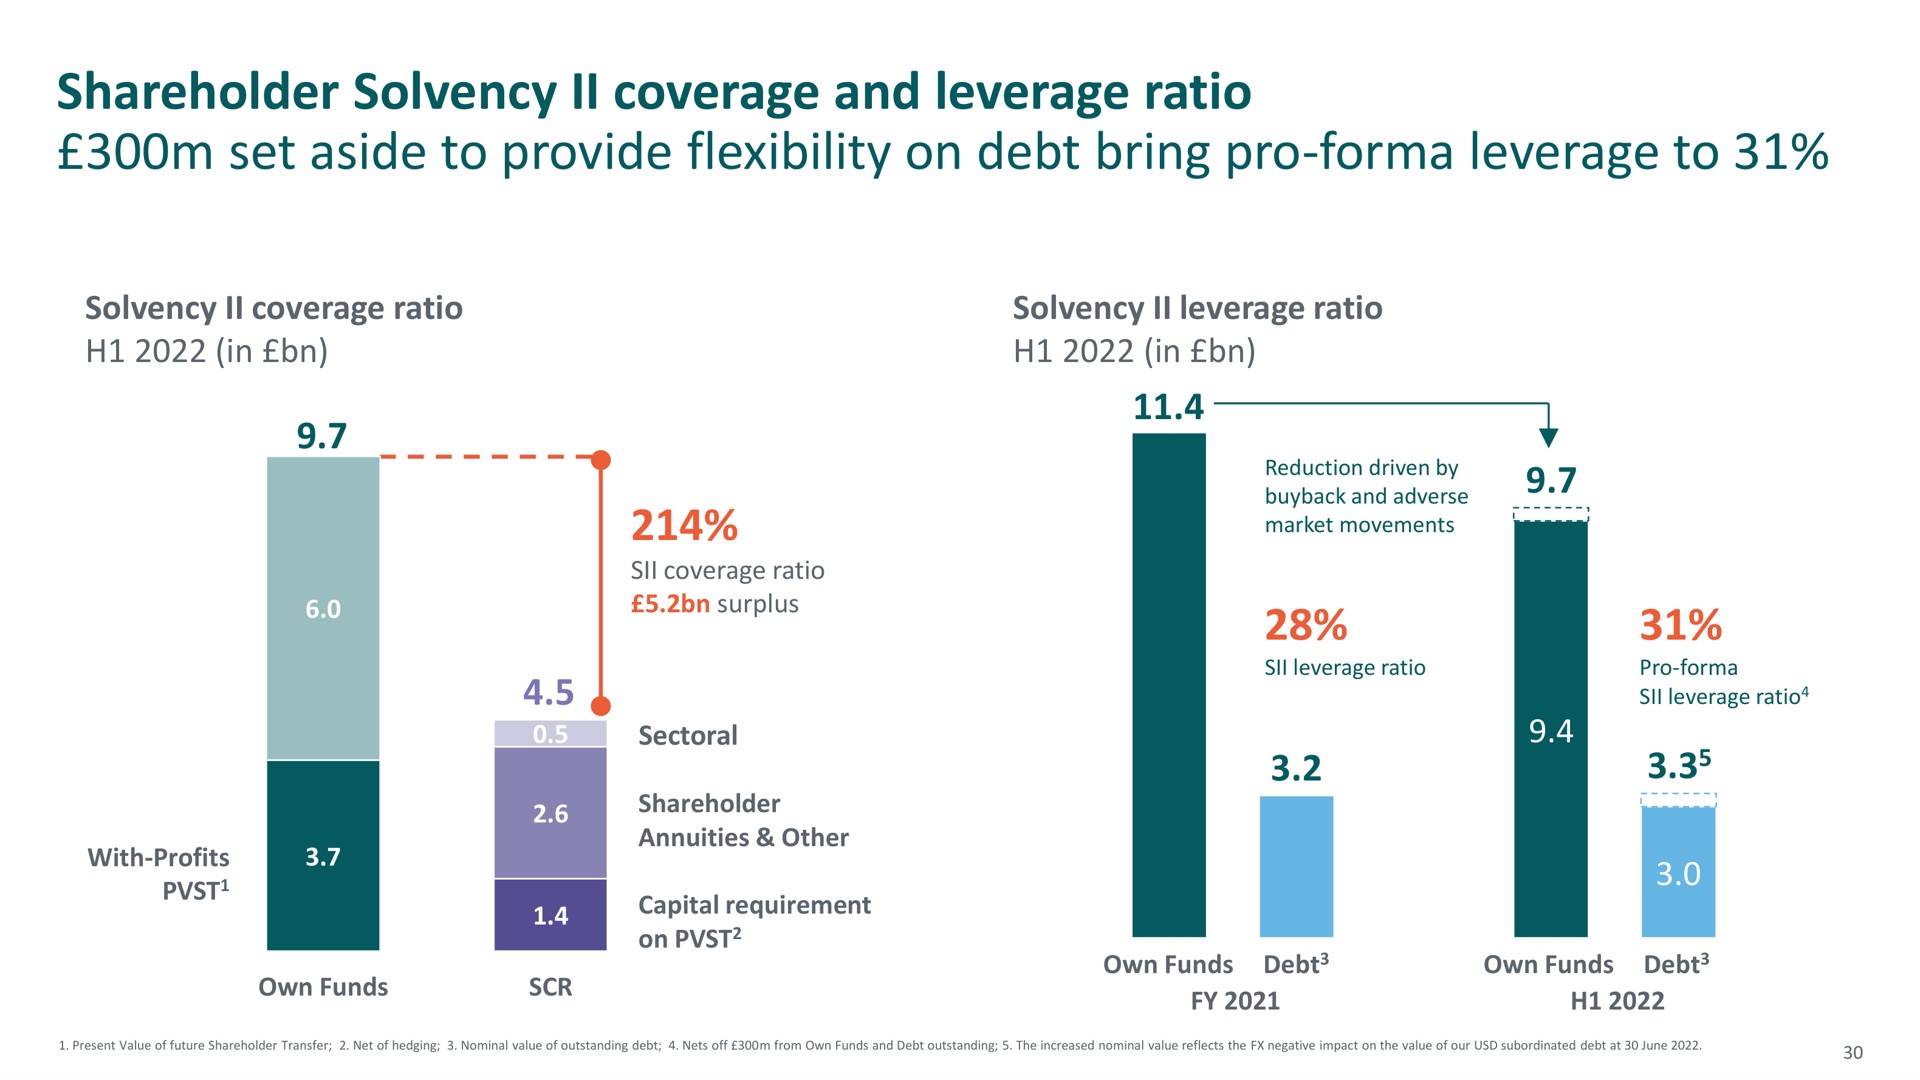 shareholder solvency coverage and leverage ratio set aside to provide flexibility on debt bring pro leverage to | M&G